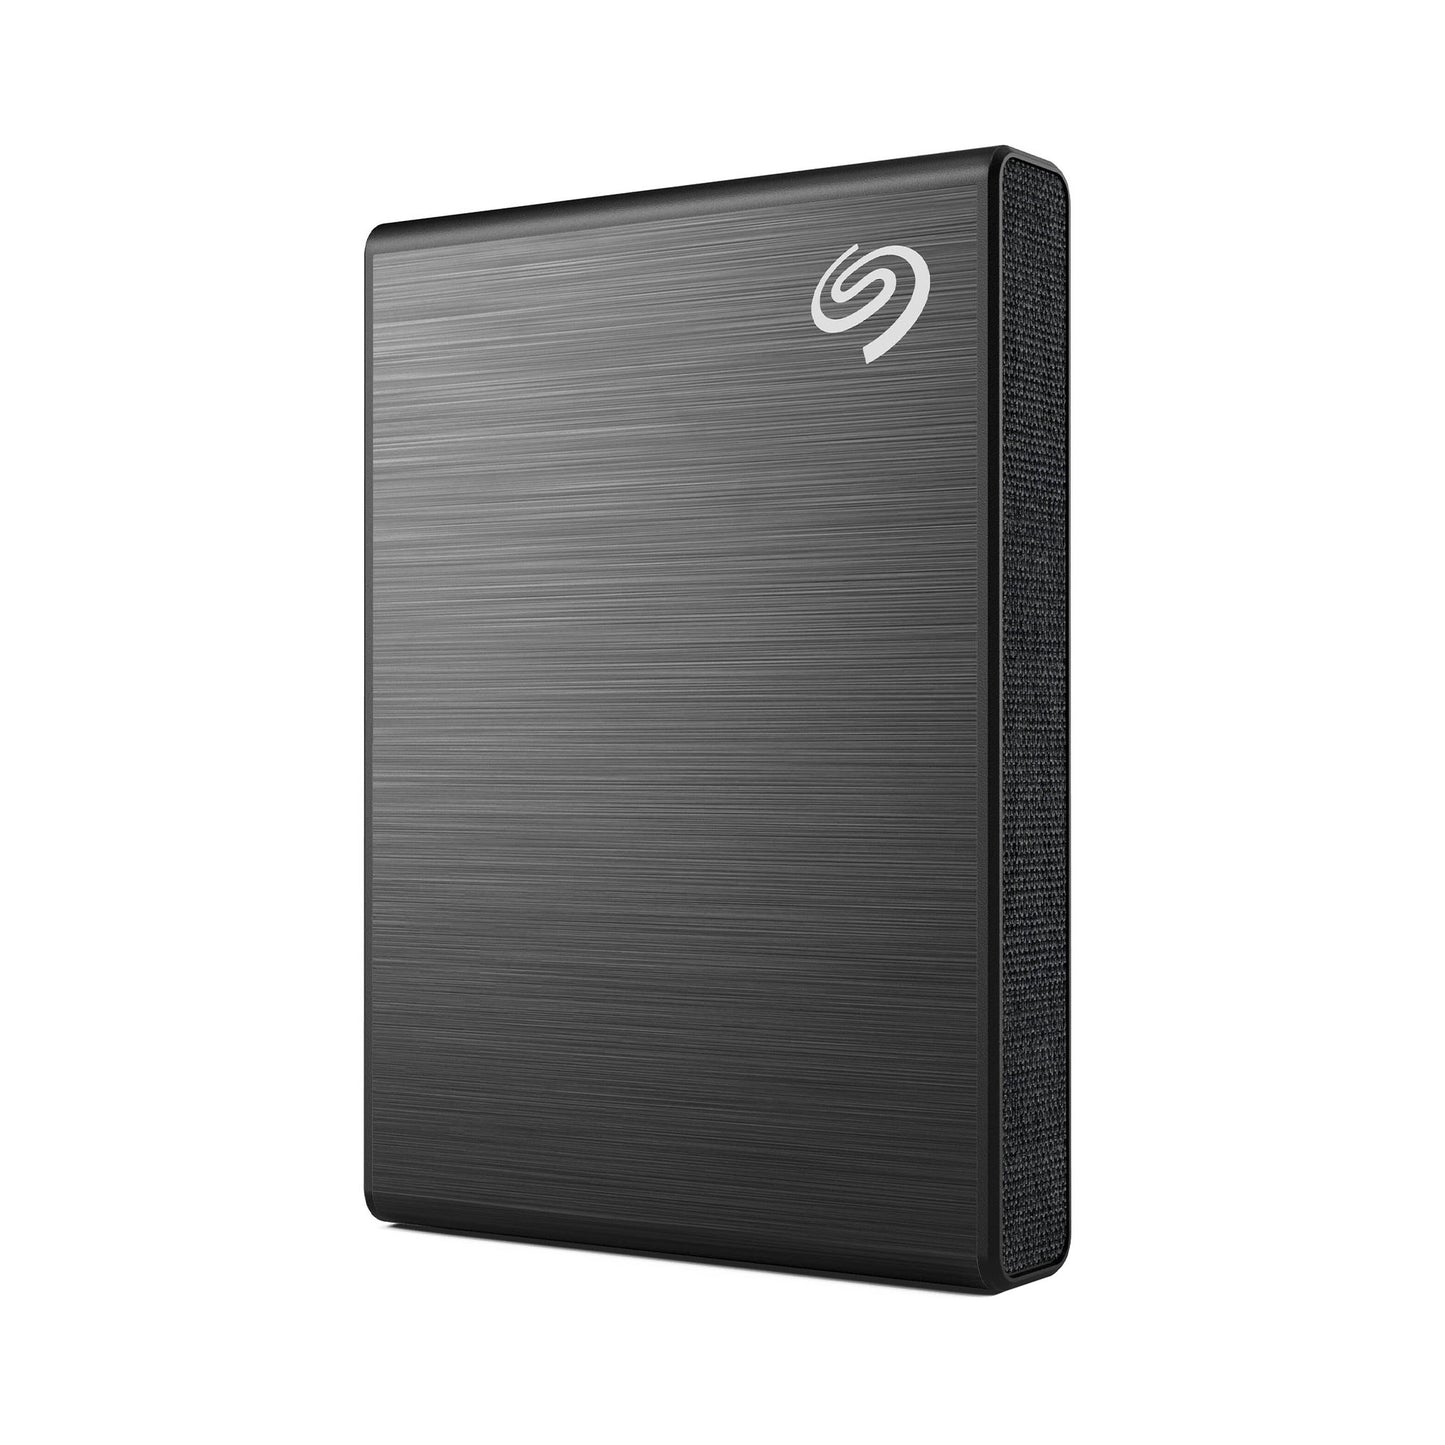 SEAGATE One Touch SSD USB 3.2 Type C 2TB - Black